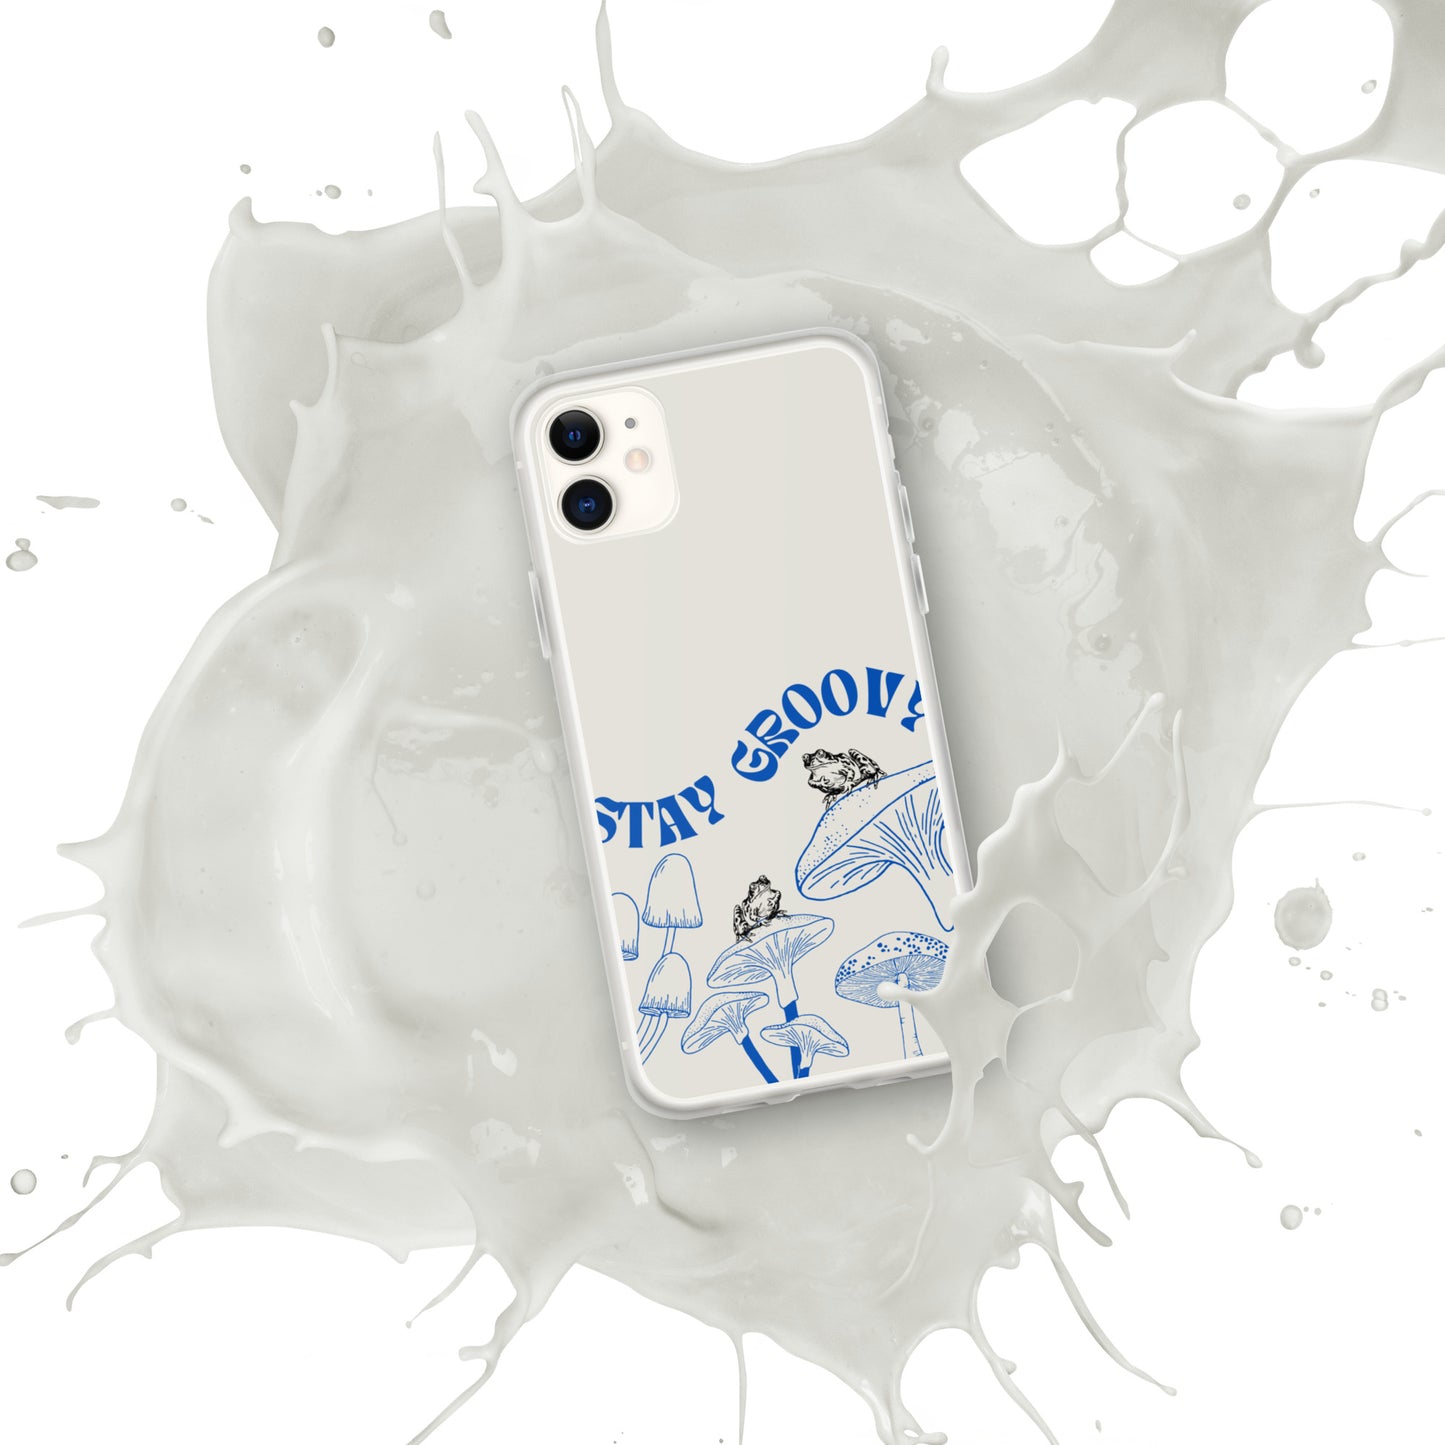 STAY GROOVY iPhone Case